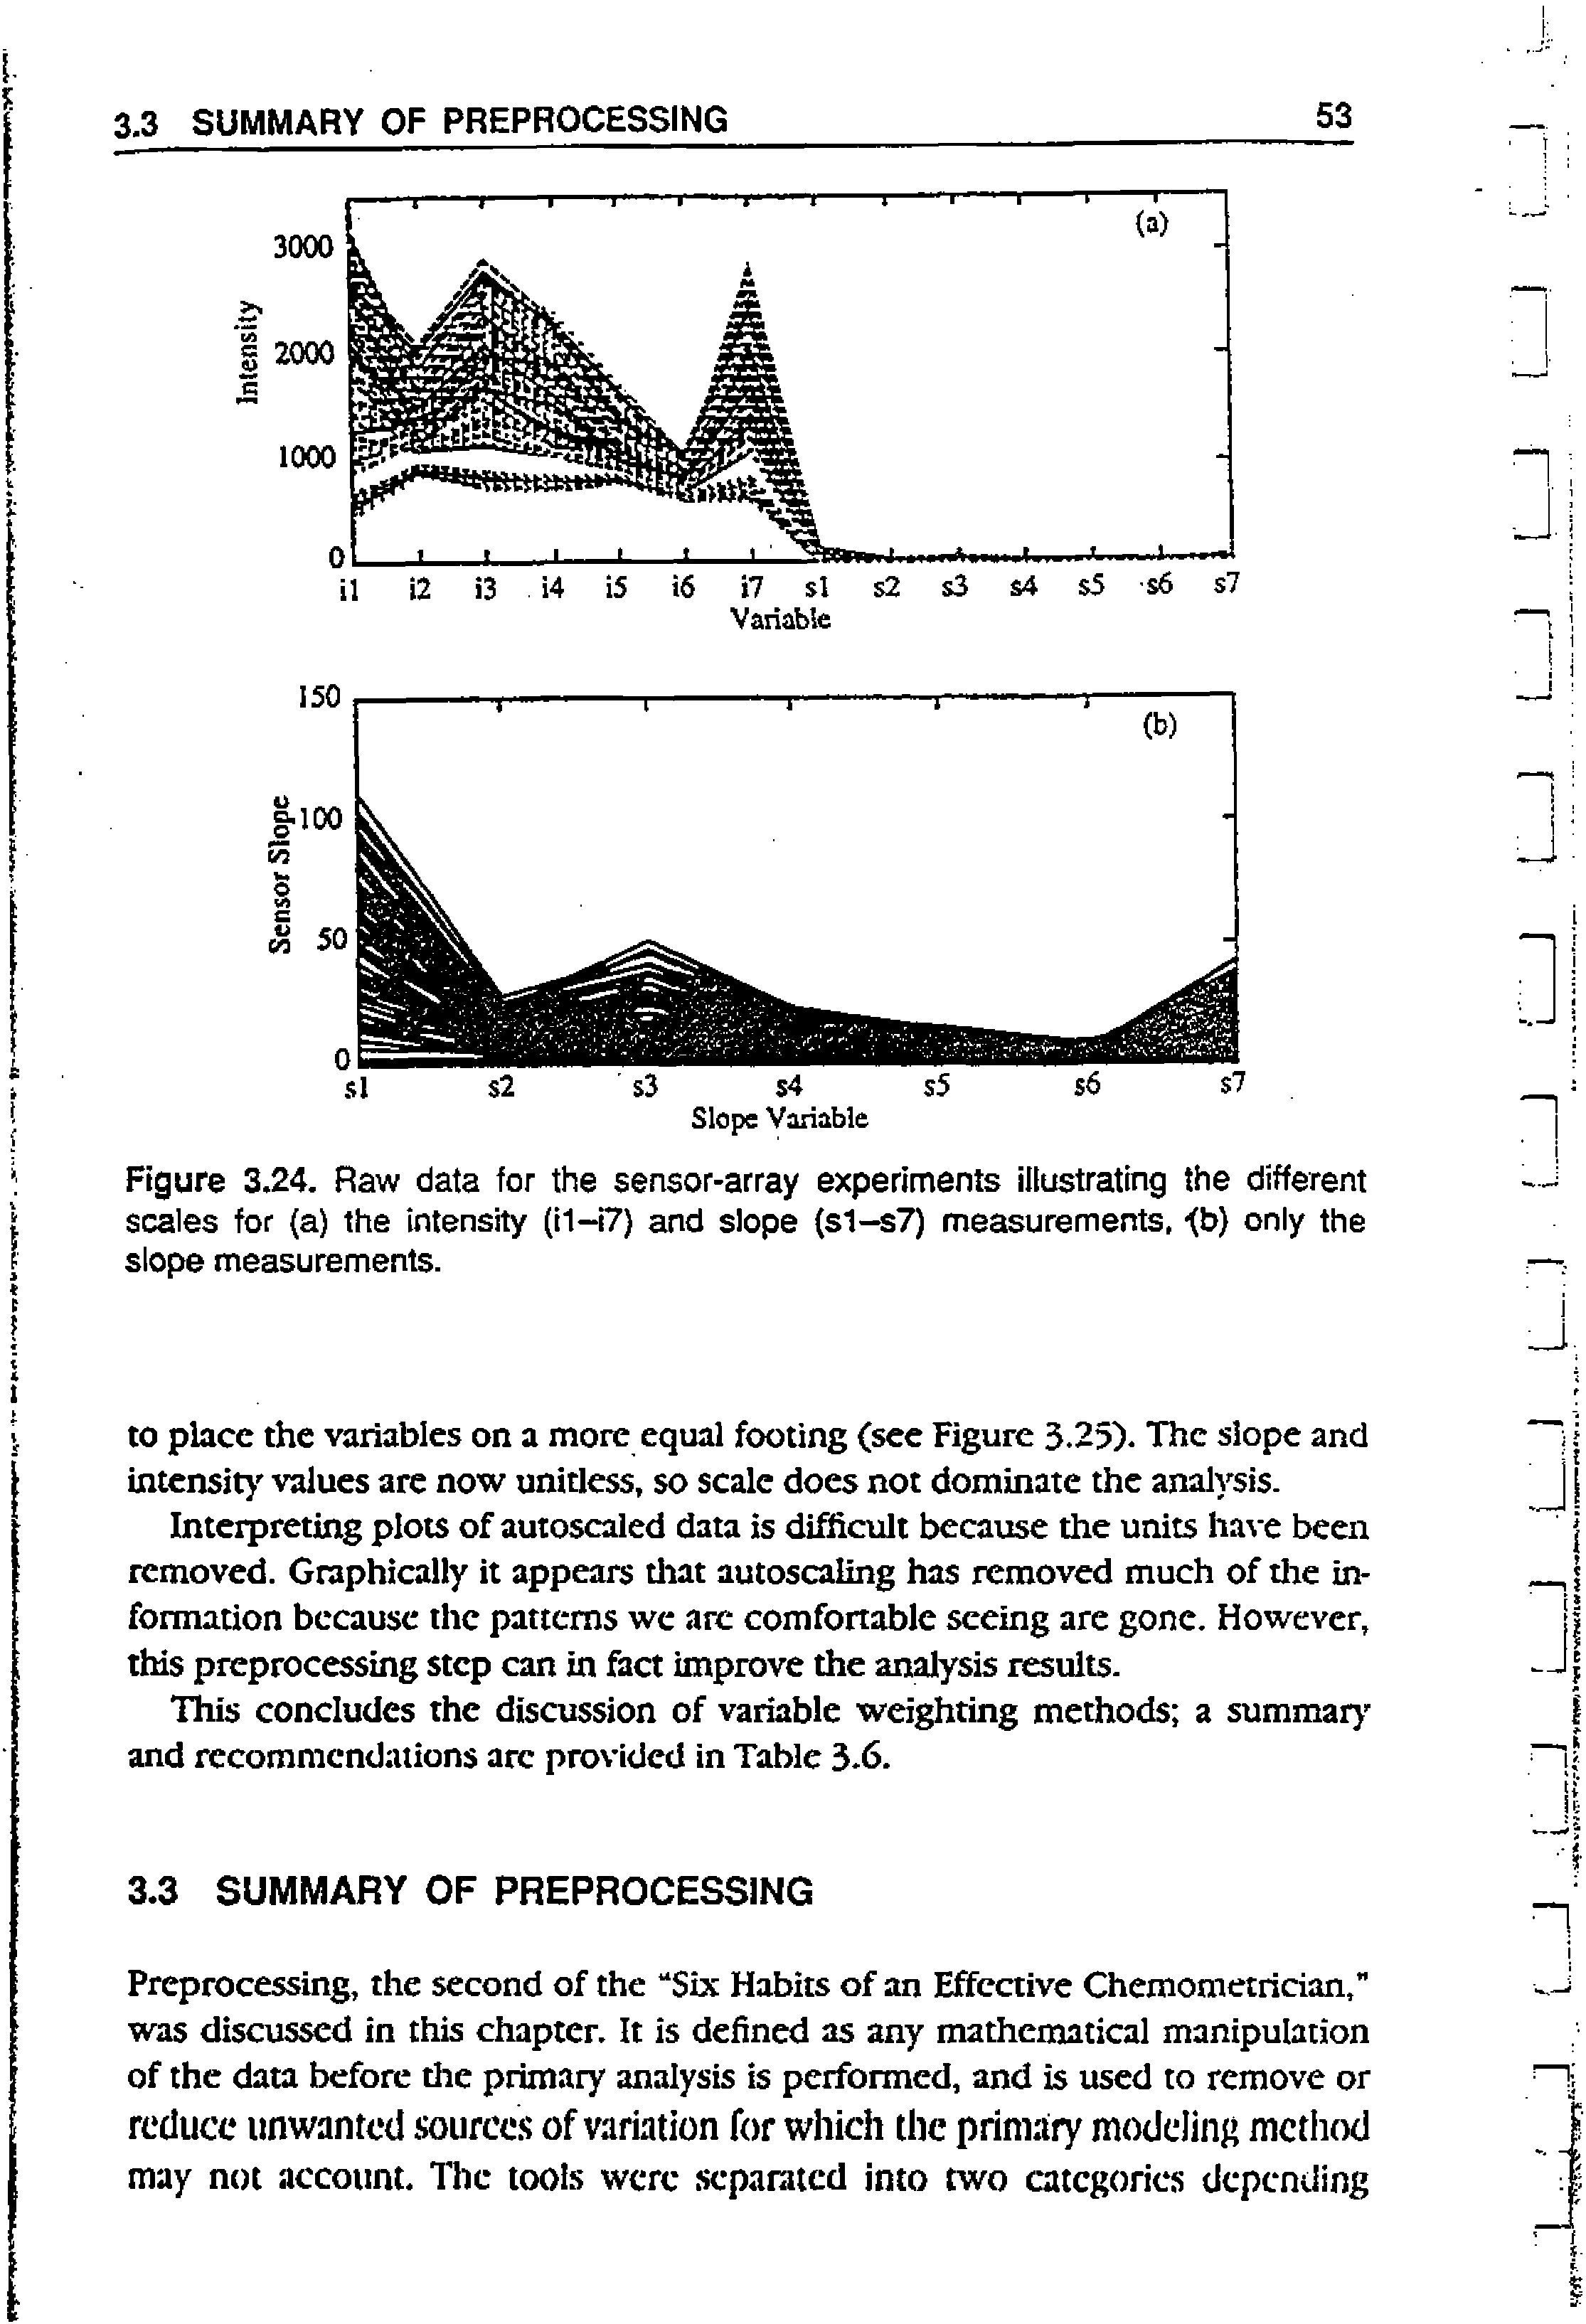 Figure 3.24. Raw data for the sensor-array experiments illustrating the different scales for (a) the intensity (i1-i7) and slope (s1-s7) measurements, <b) only the slope measurements.